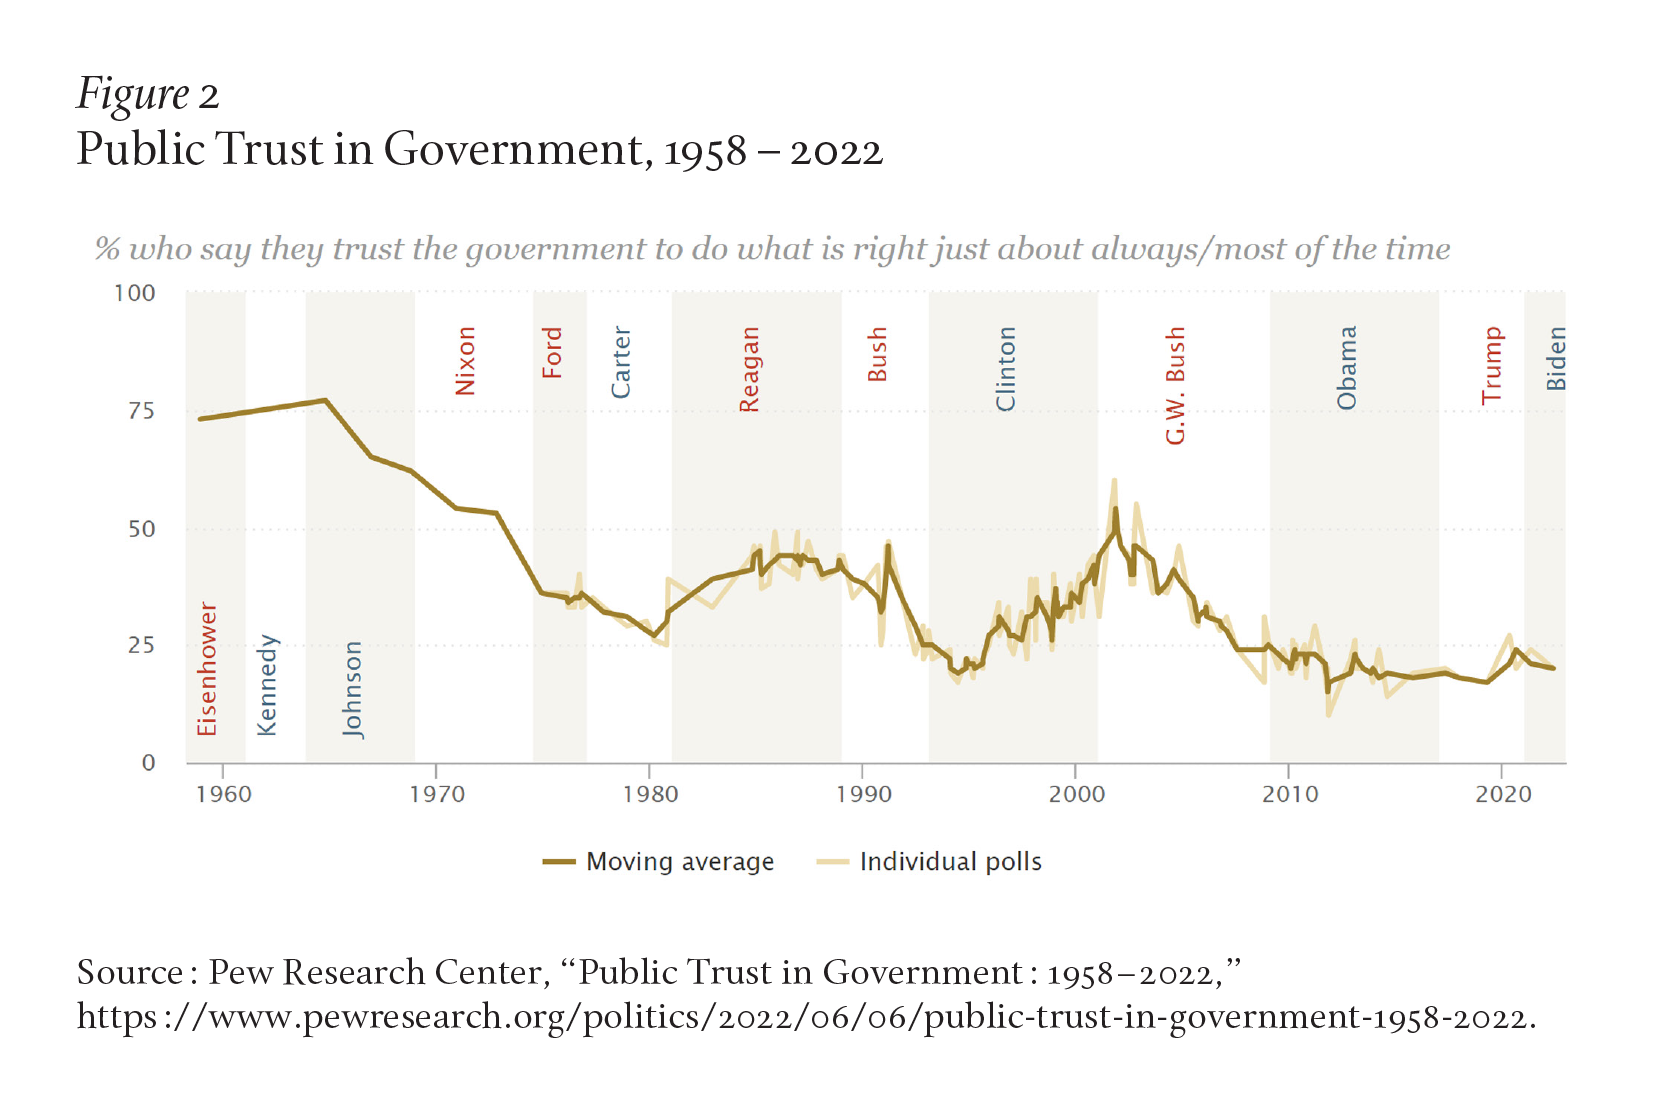 The graph shows the percent of people who say they trust the government to do what is right just about always or most of the time. The line peaks early in LBJ's presidency in 1966, then drops precipitously until Reagan's election. Trust bottoms out in Clinton era before steadily climbing into new millennium. Trust reaches its 21st century peak in 2001, followed by a steady decline through Bush II, Obama, Trump, and Biden, flattening out around 20-25%. Data from Pew Research Center.